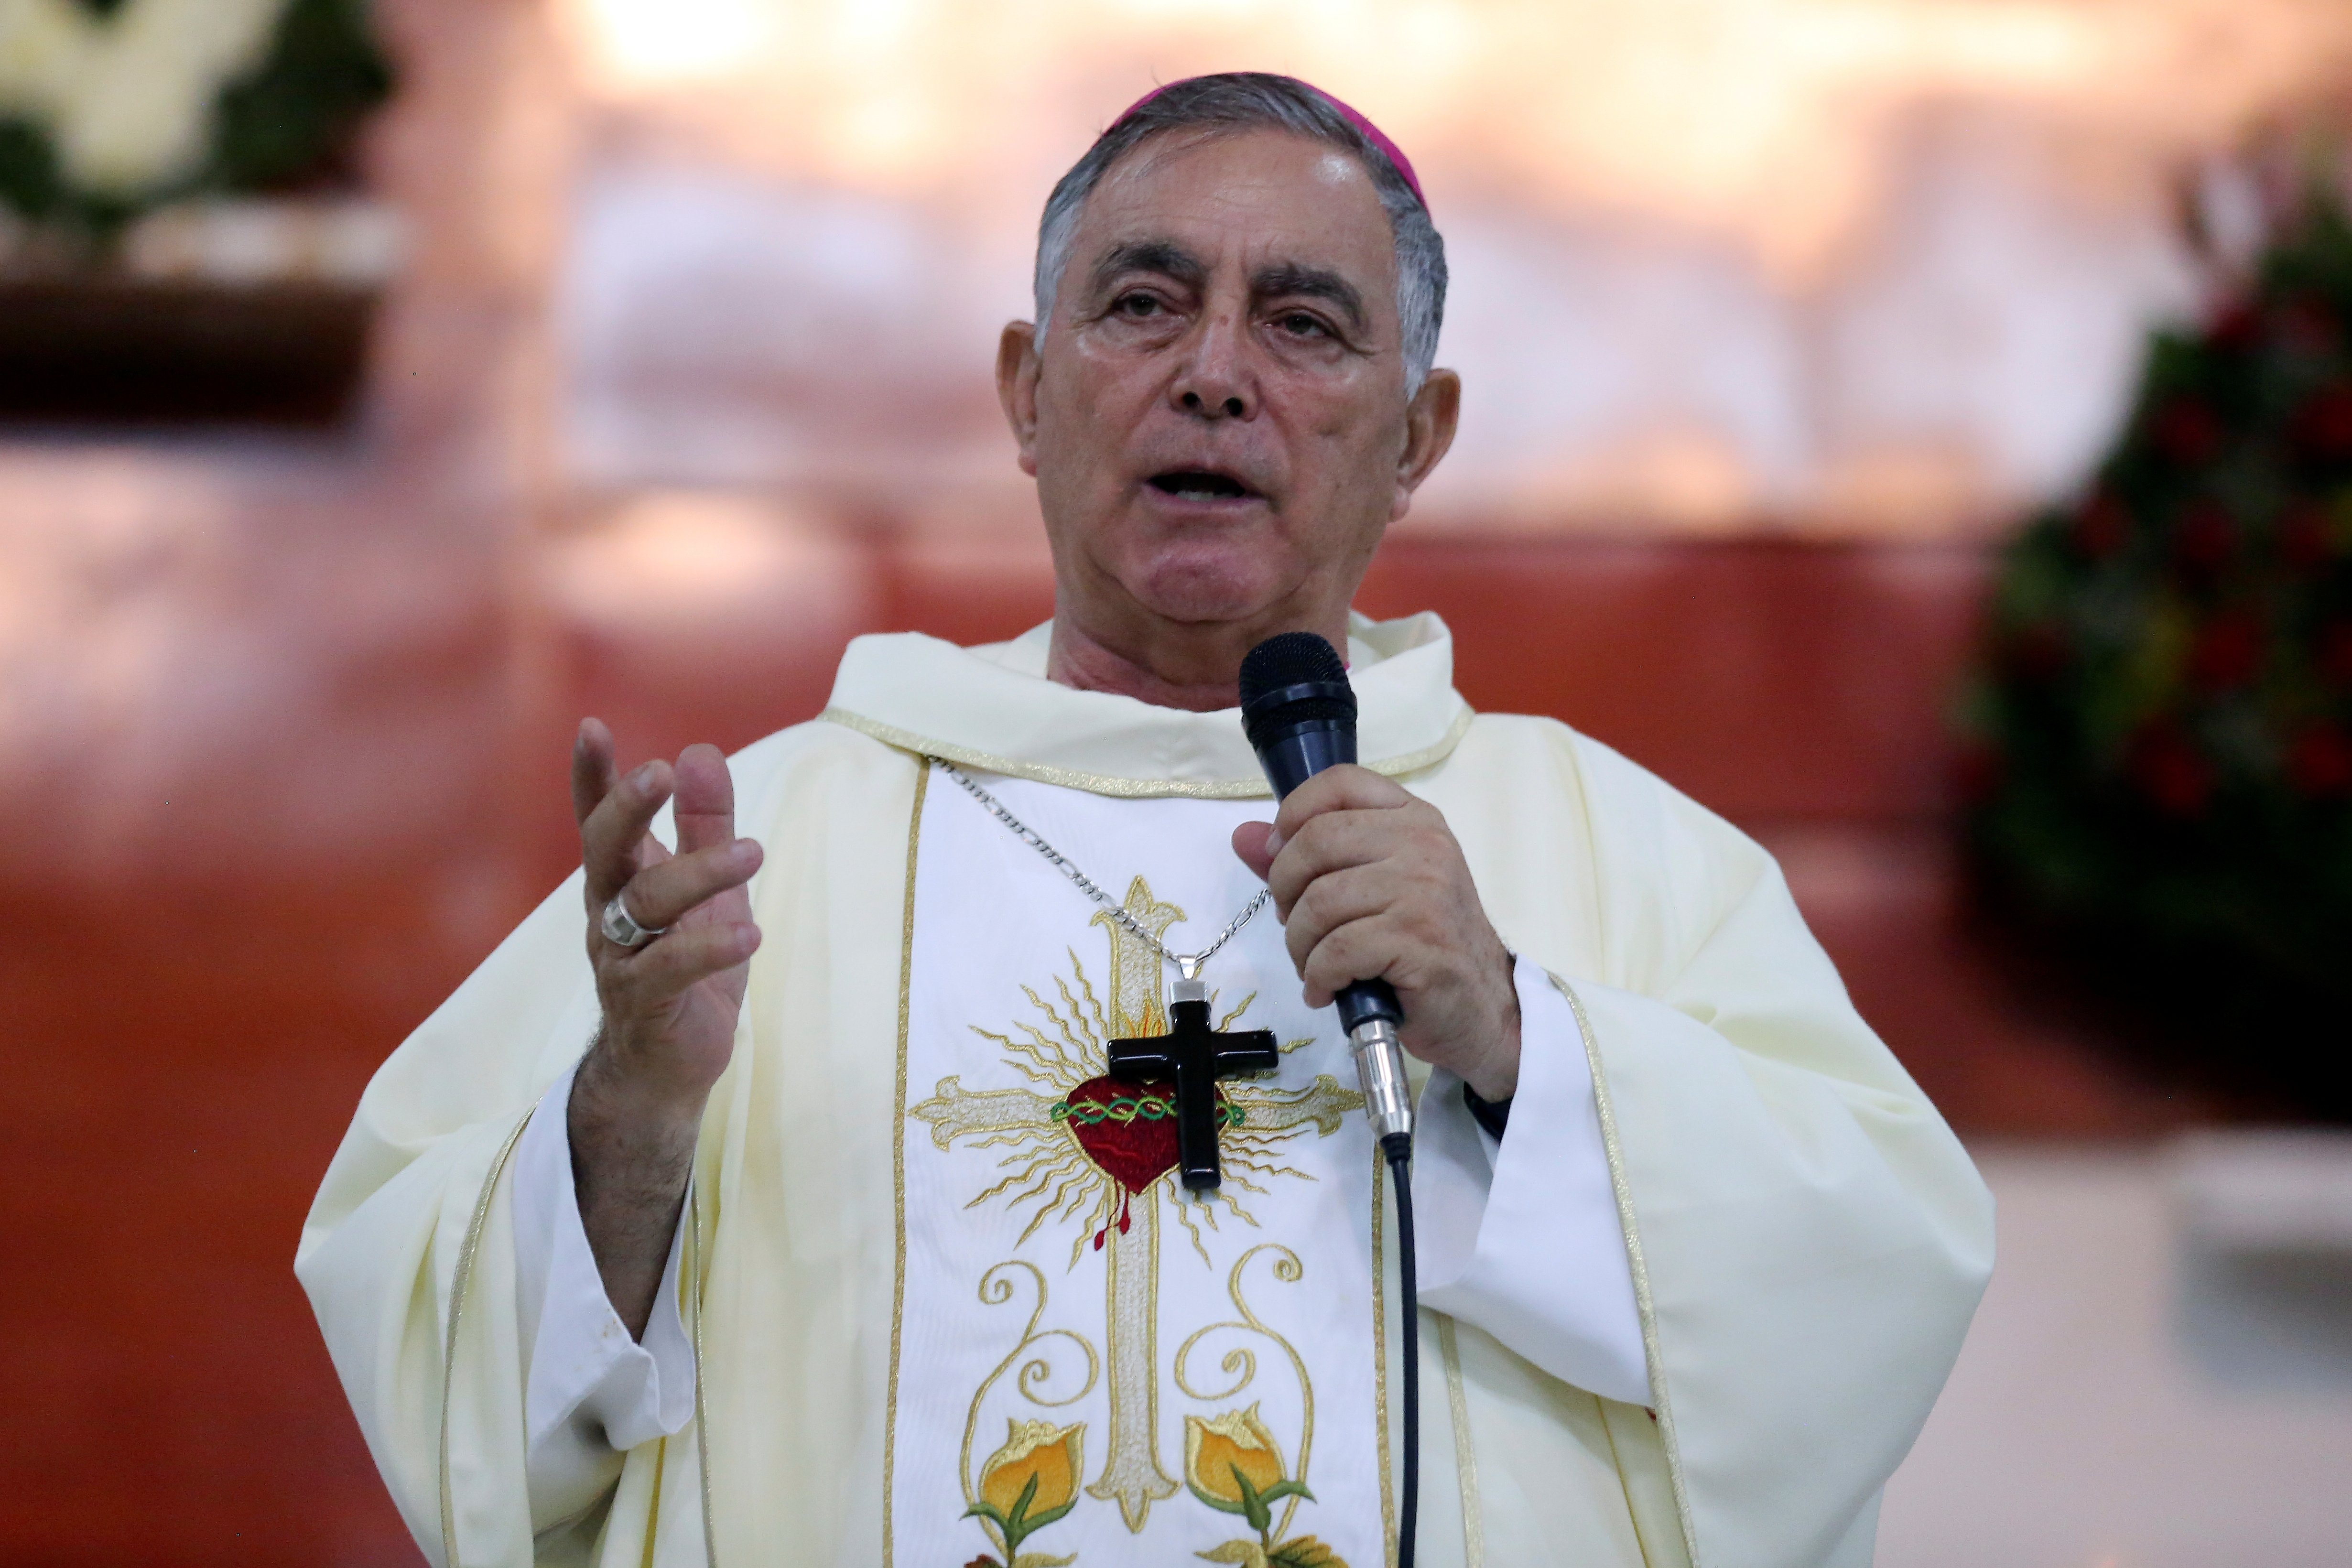 Bishop Salvador Rangel Mendoza of Chilpancingo-Chilapa, Mexico, celebrates Mass in Chilpancingo June 7, 2018. The now-retired Mexican bishop known for brokering deals with drug cartel bosses was located in a hospital bed April 29, 2024, after being incommunicado for two days, though local officials believe he was briefly abducted in an "express kidnapping" by unknown assailants. (OSV News photo/Gustavo Graf, Reuters)